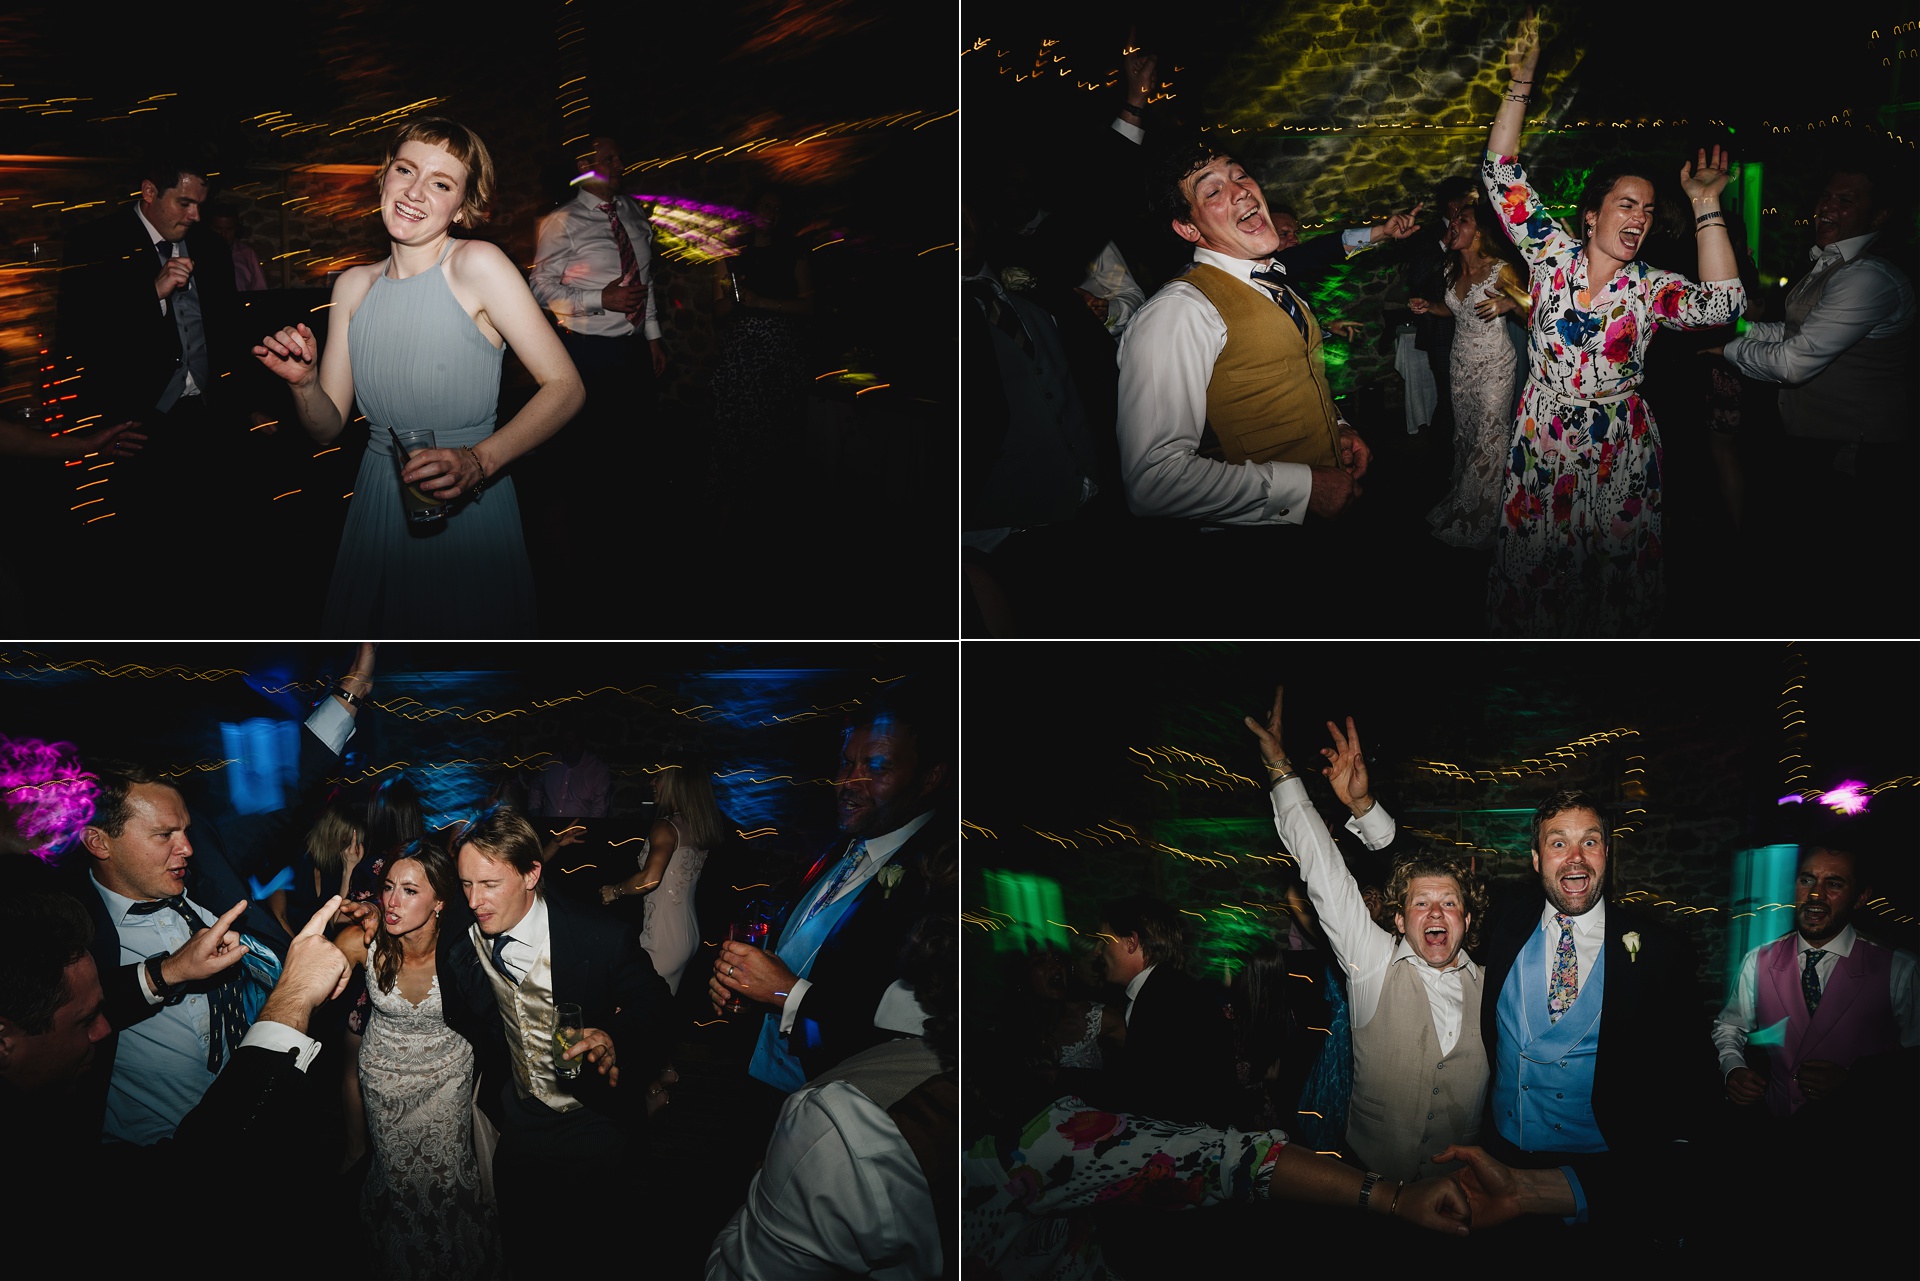 Wedding guests dancing at an amazing barn wedding with disco lighting